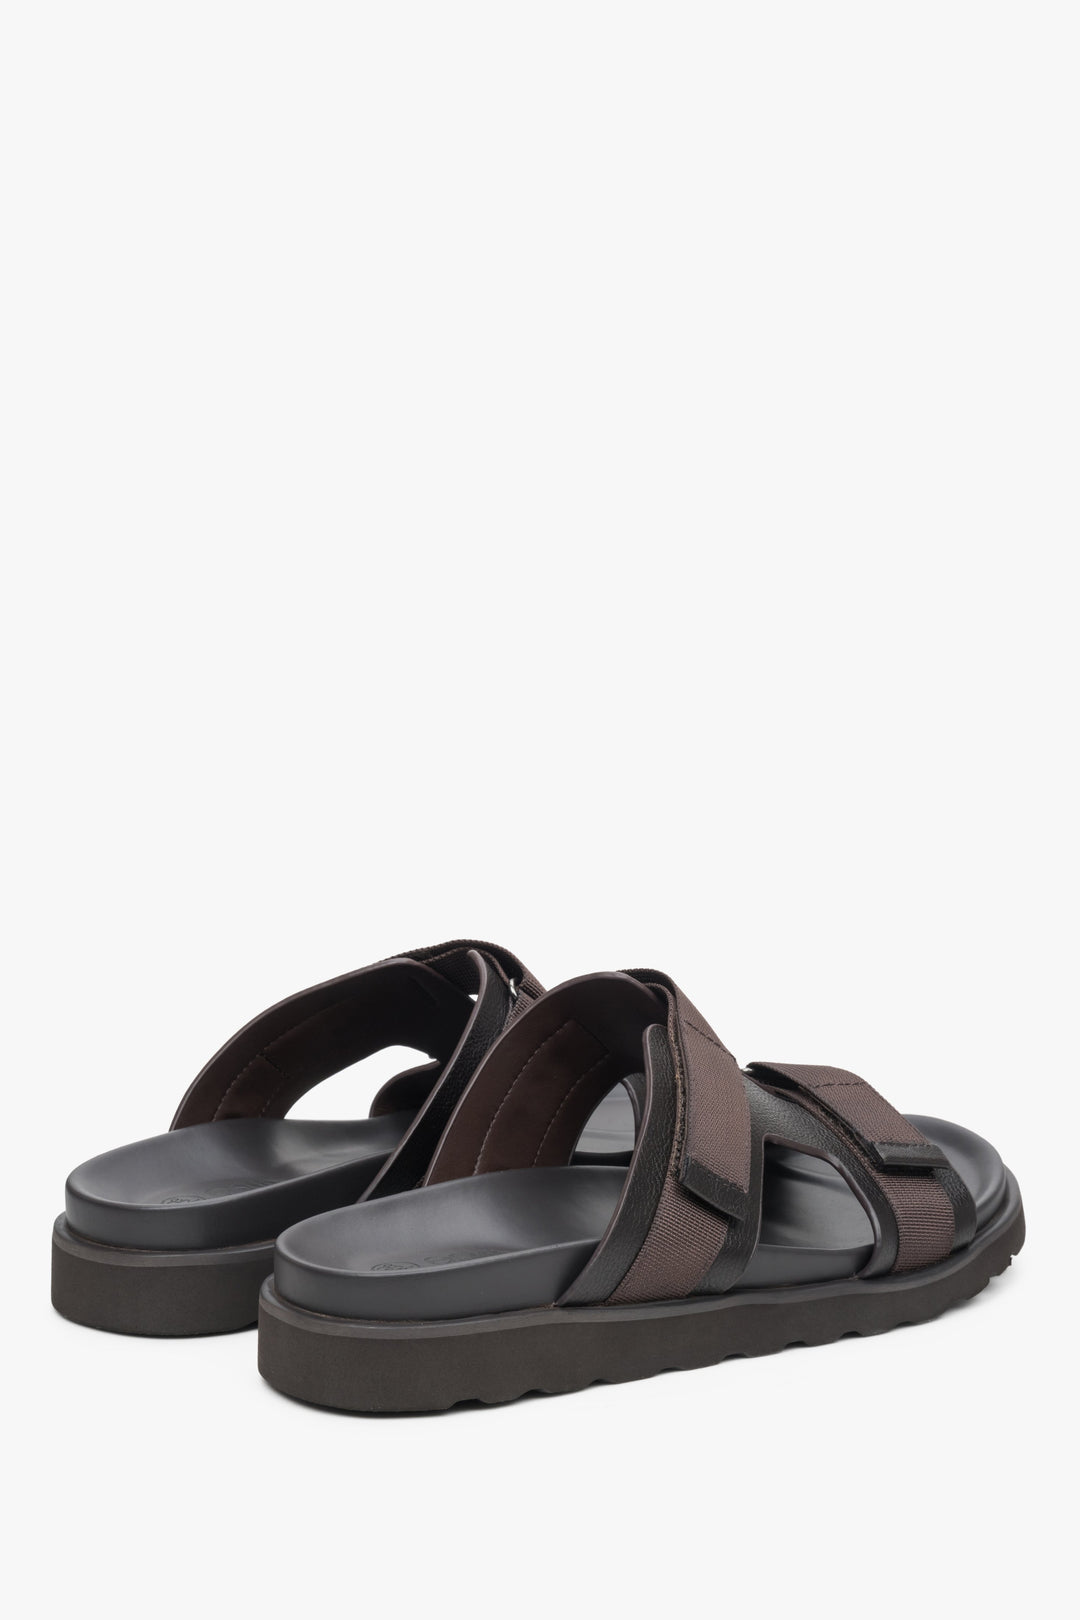 Men's dark brown leather sandals with textile elements - close-up on the toe line and heel line.